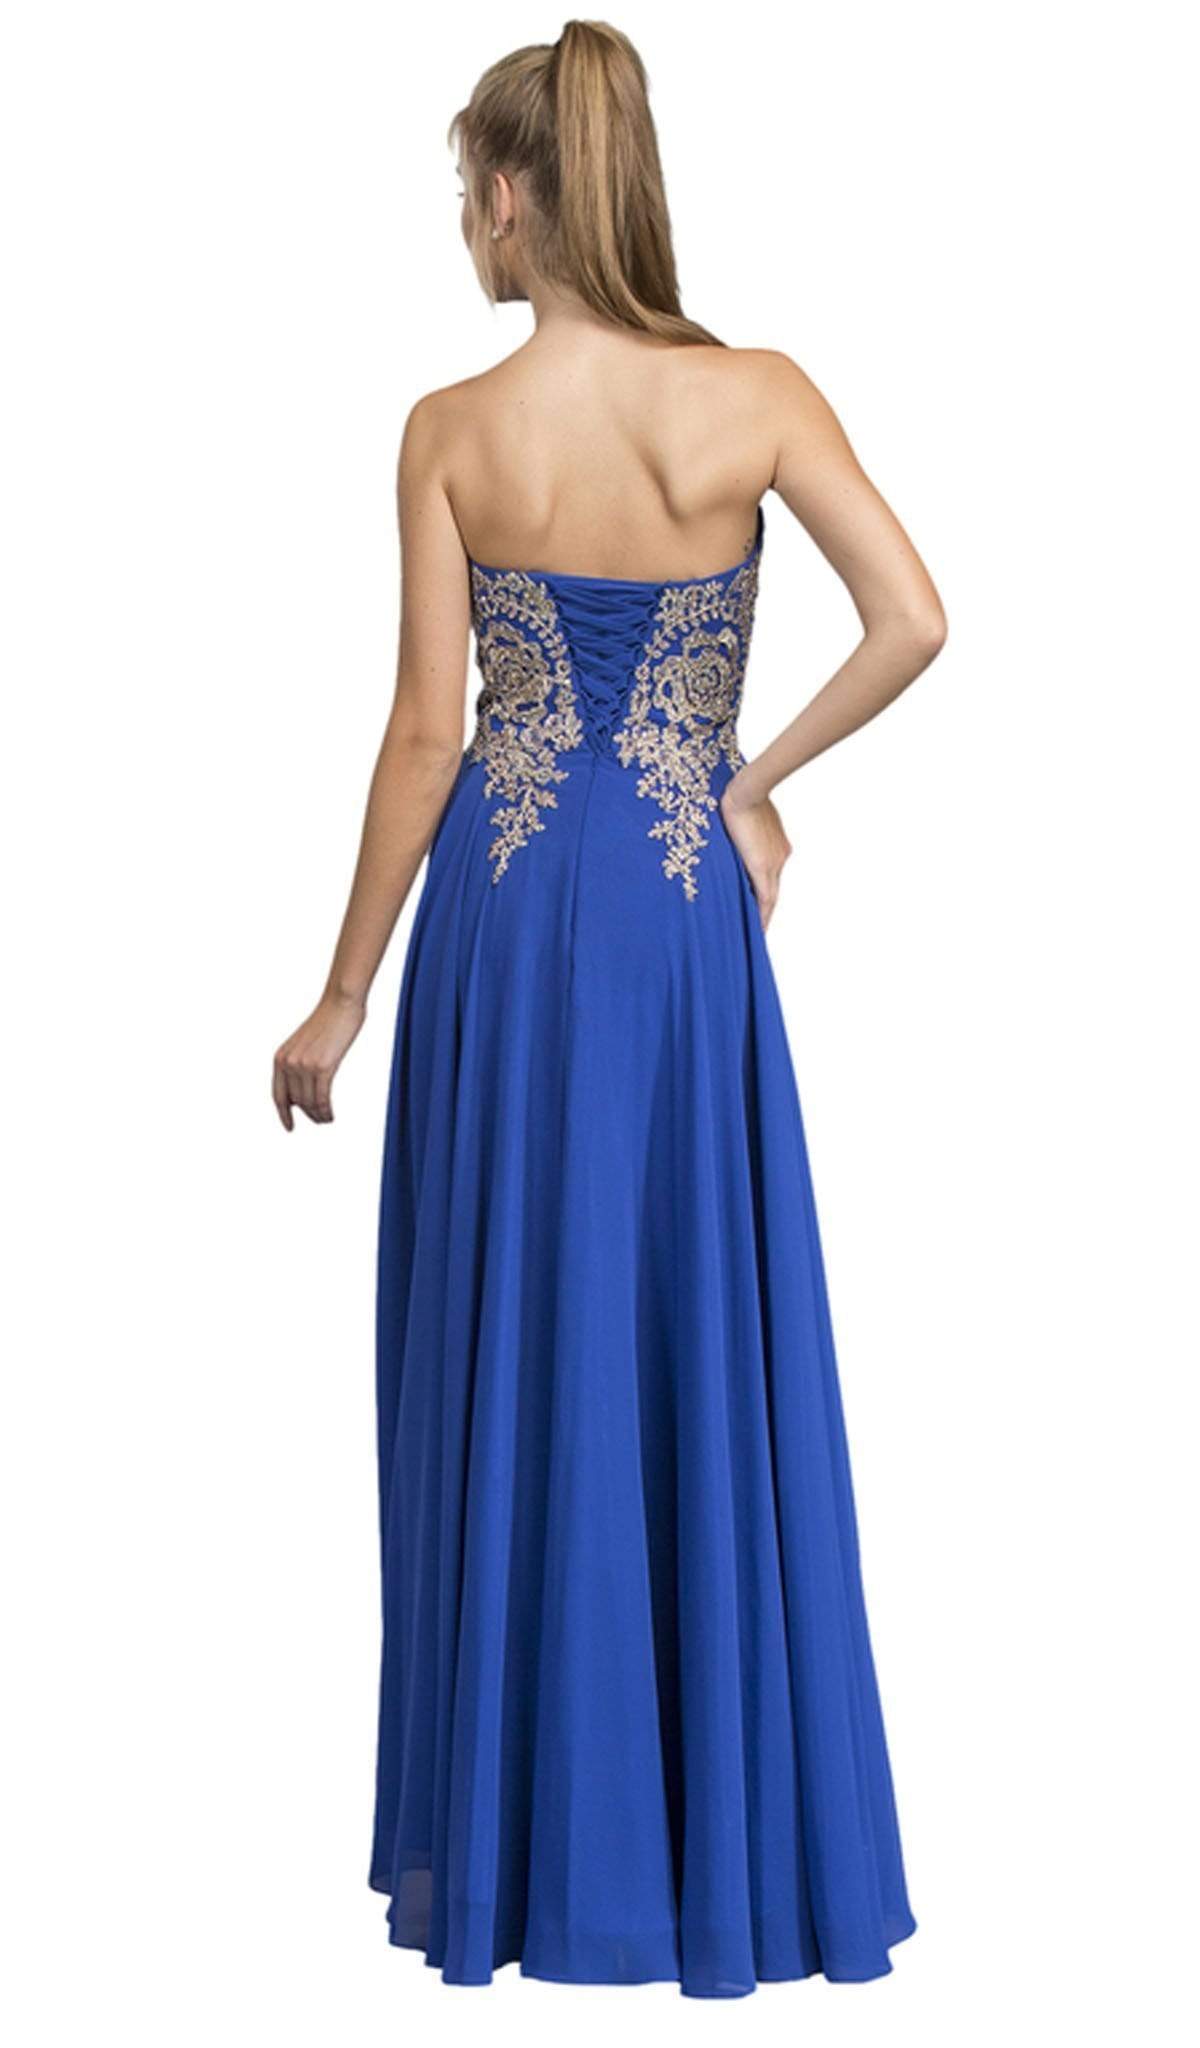 Strapless Applique Sweetheart Prom Dress Prom Dresses